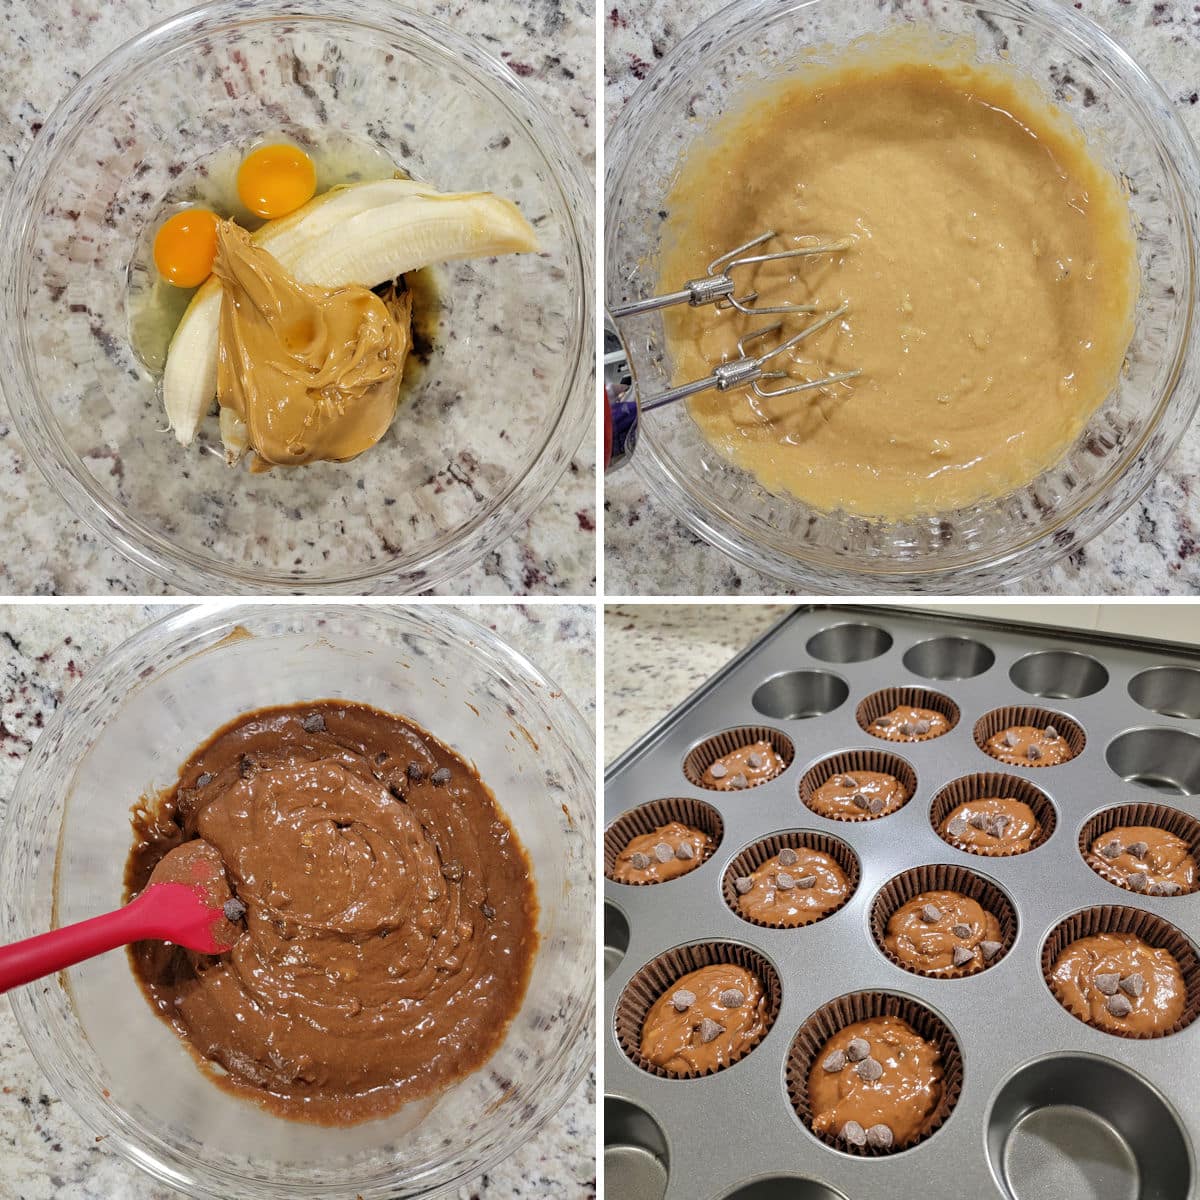 Making muffin batter in a glass bowl and dividing into a muffin pan.